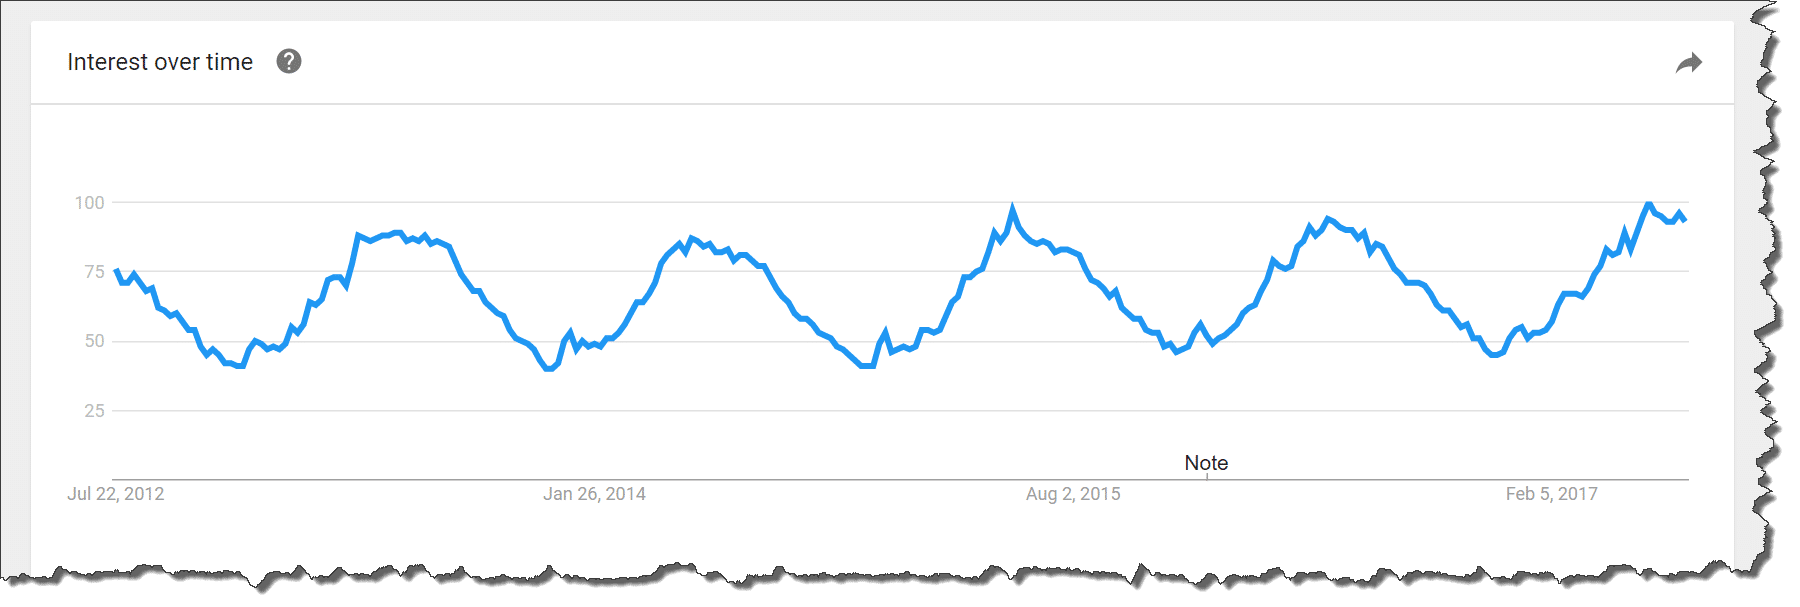 Interest Over Time bass fish